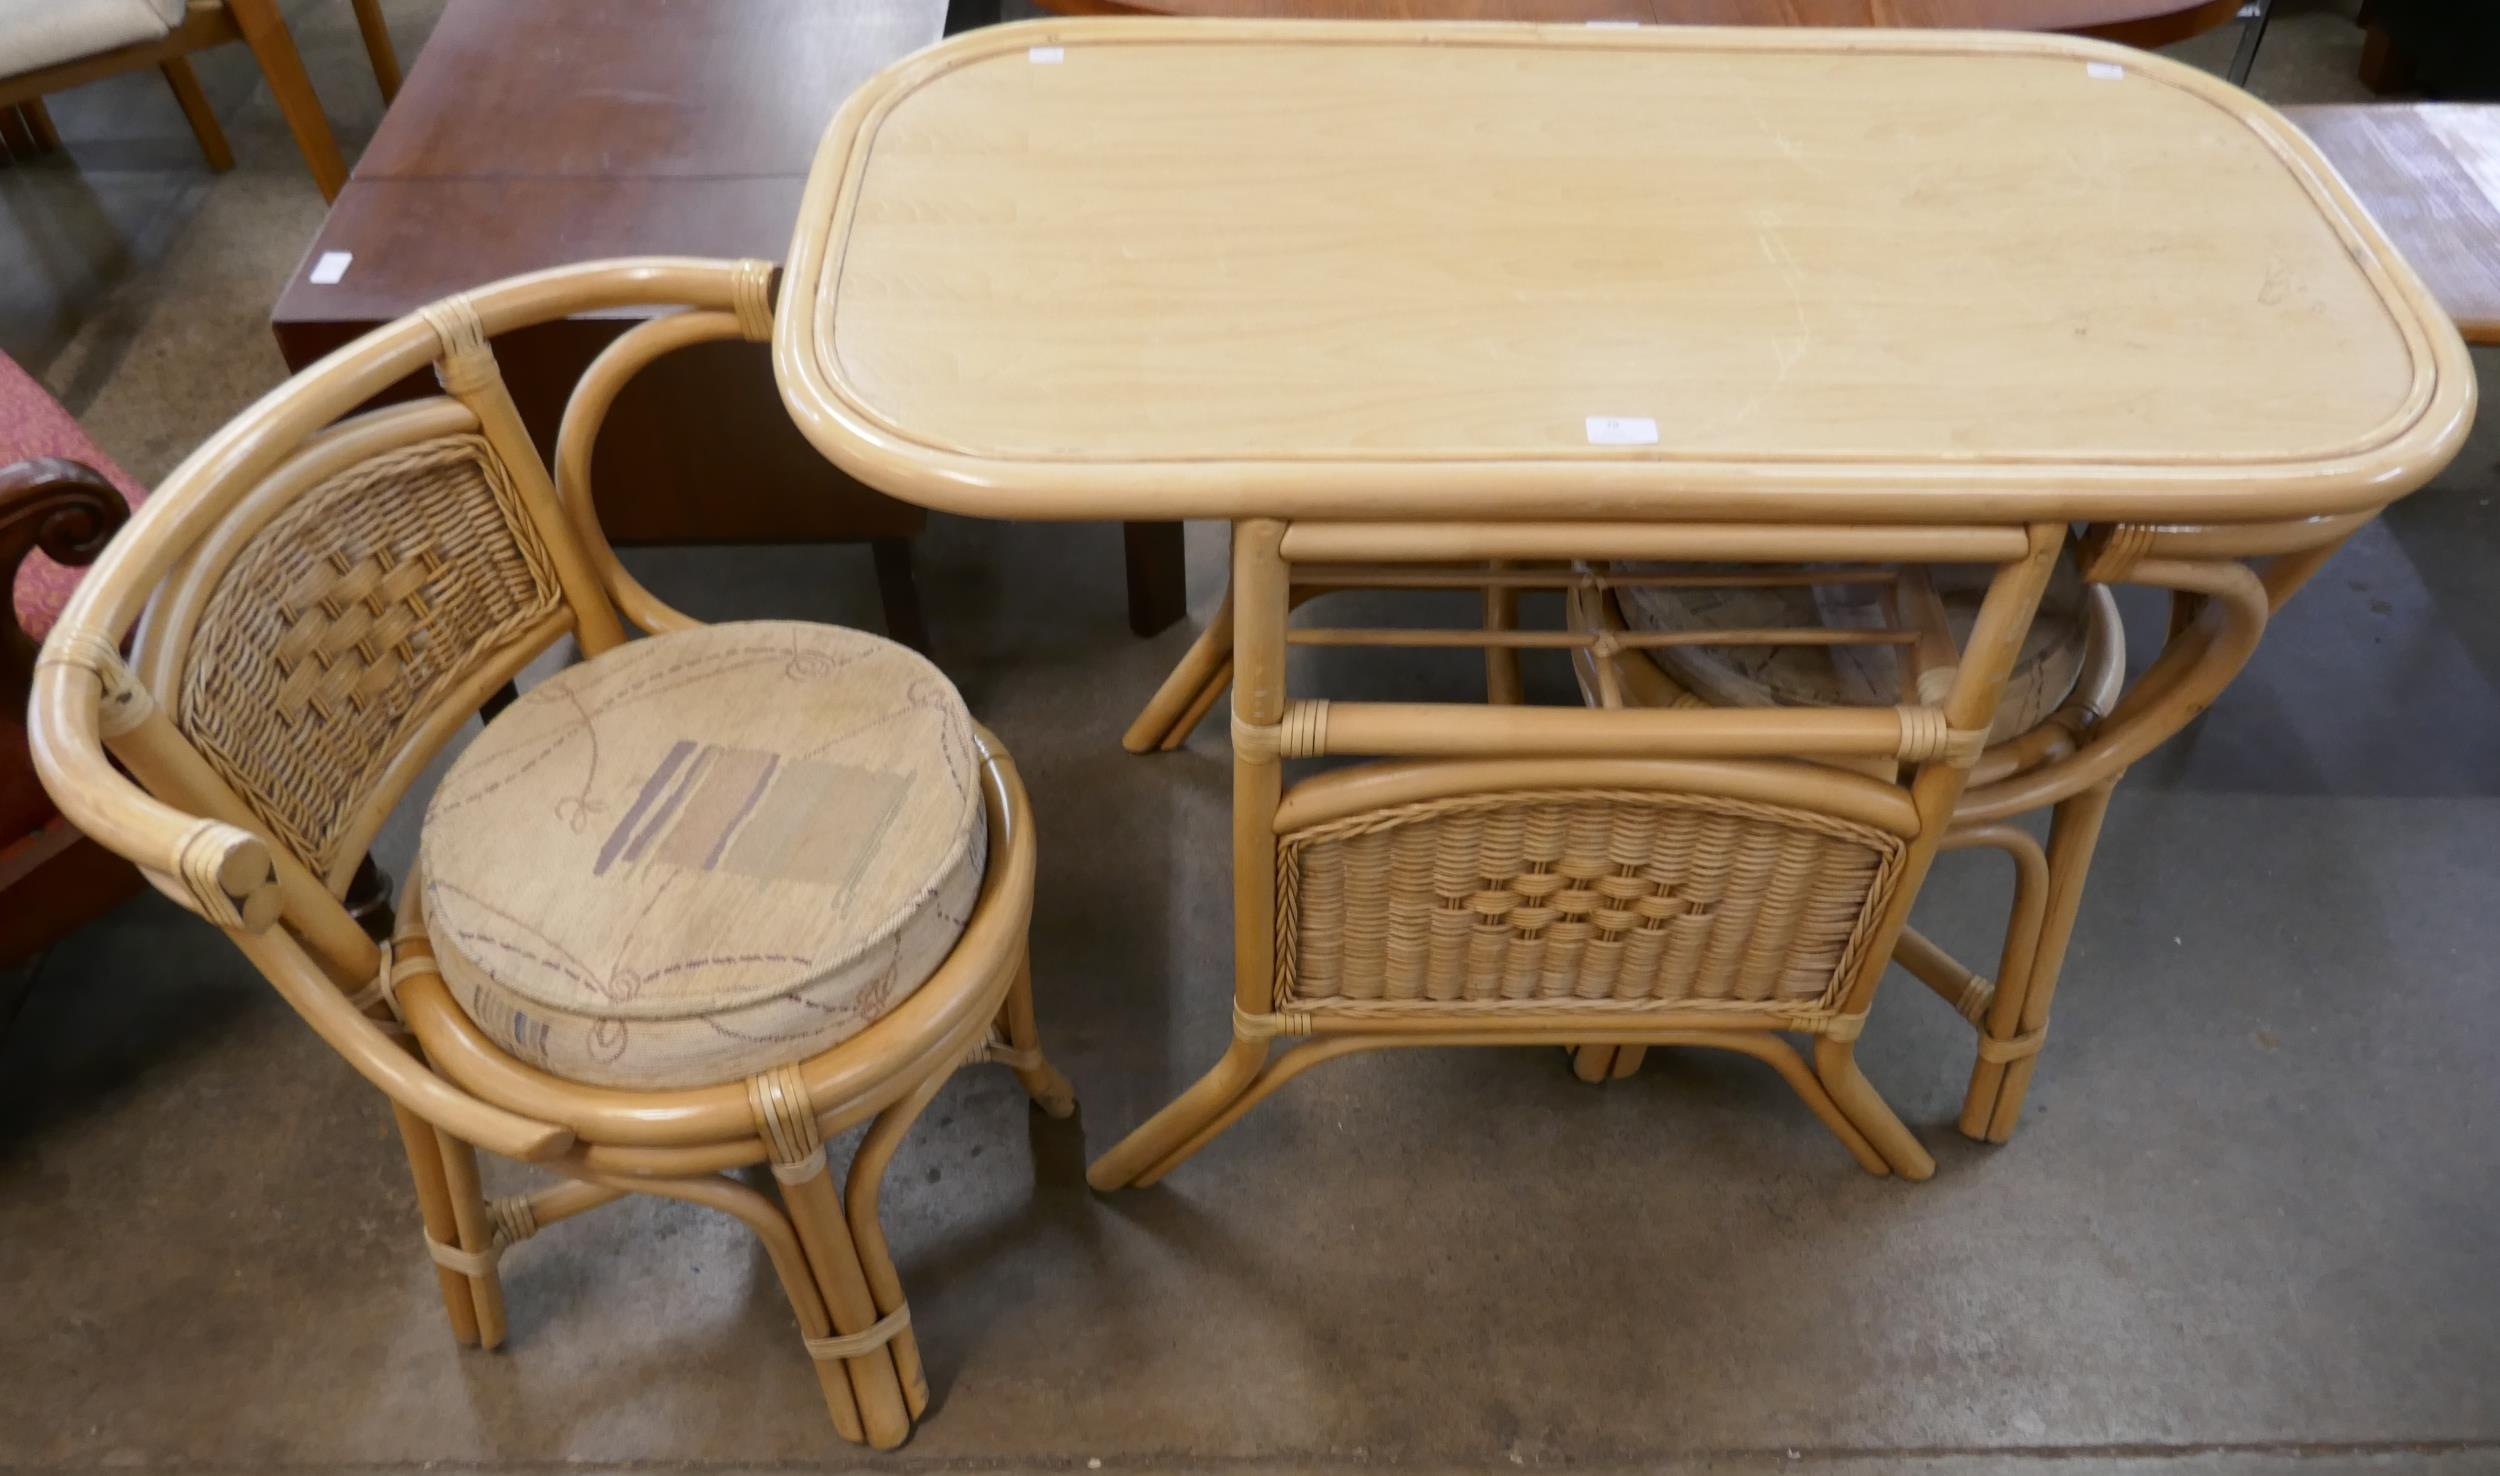 A wicker and rattan table and two chairs